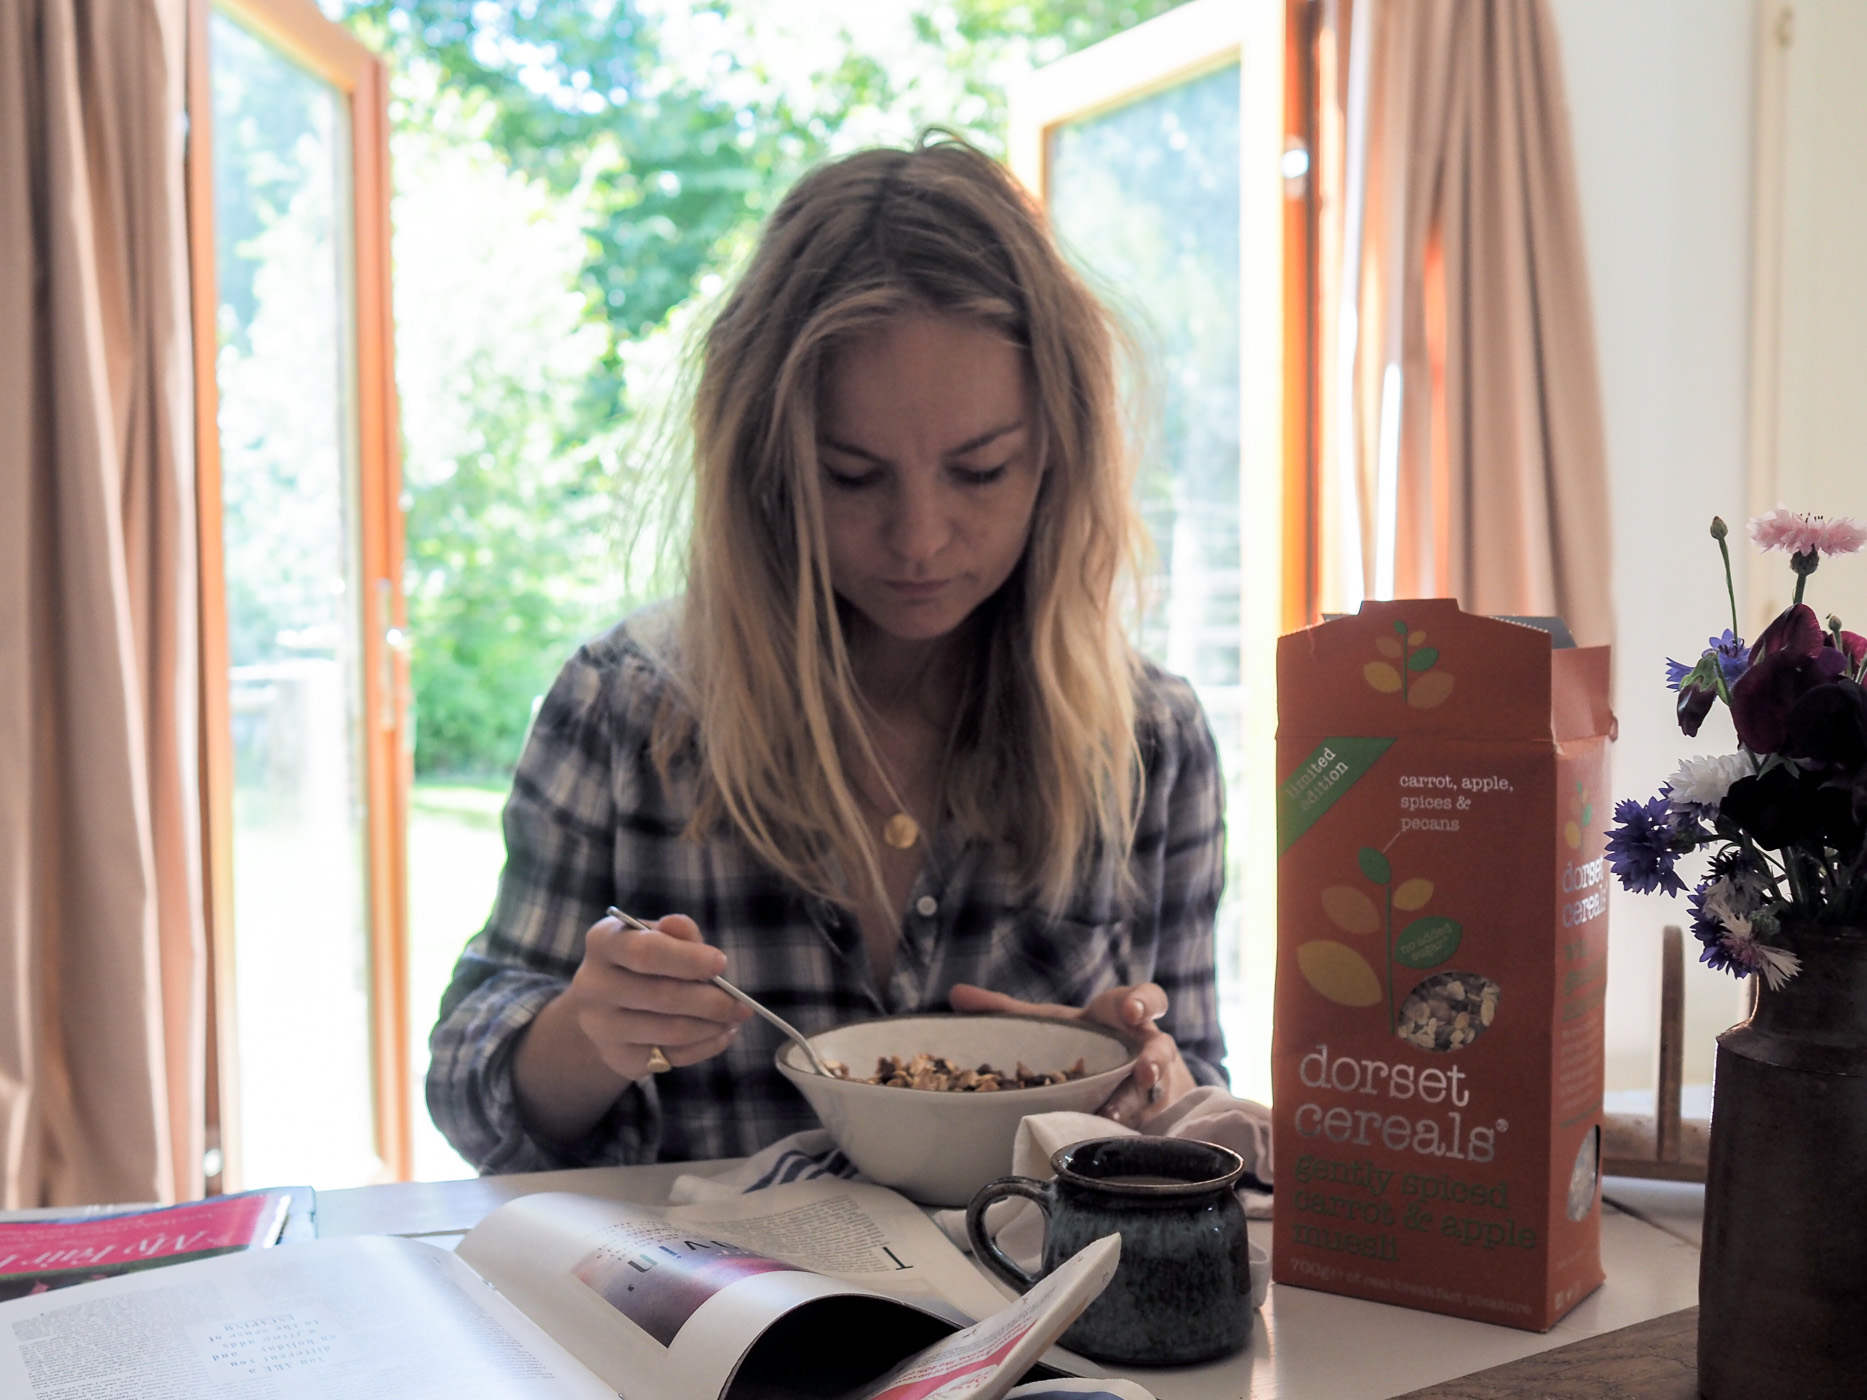 The Woodland Wife - Slow Breakfast - Dorset Cereals - Limited Edition - Gently Spiced Carrot & Apple Muesli 